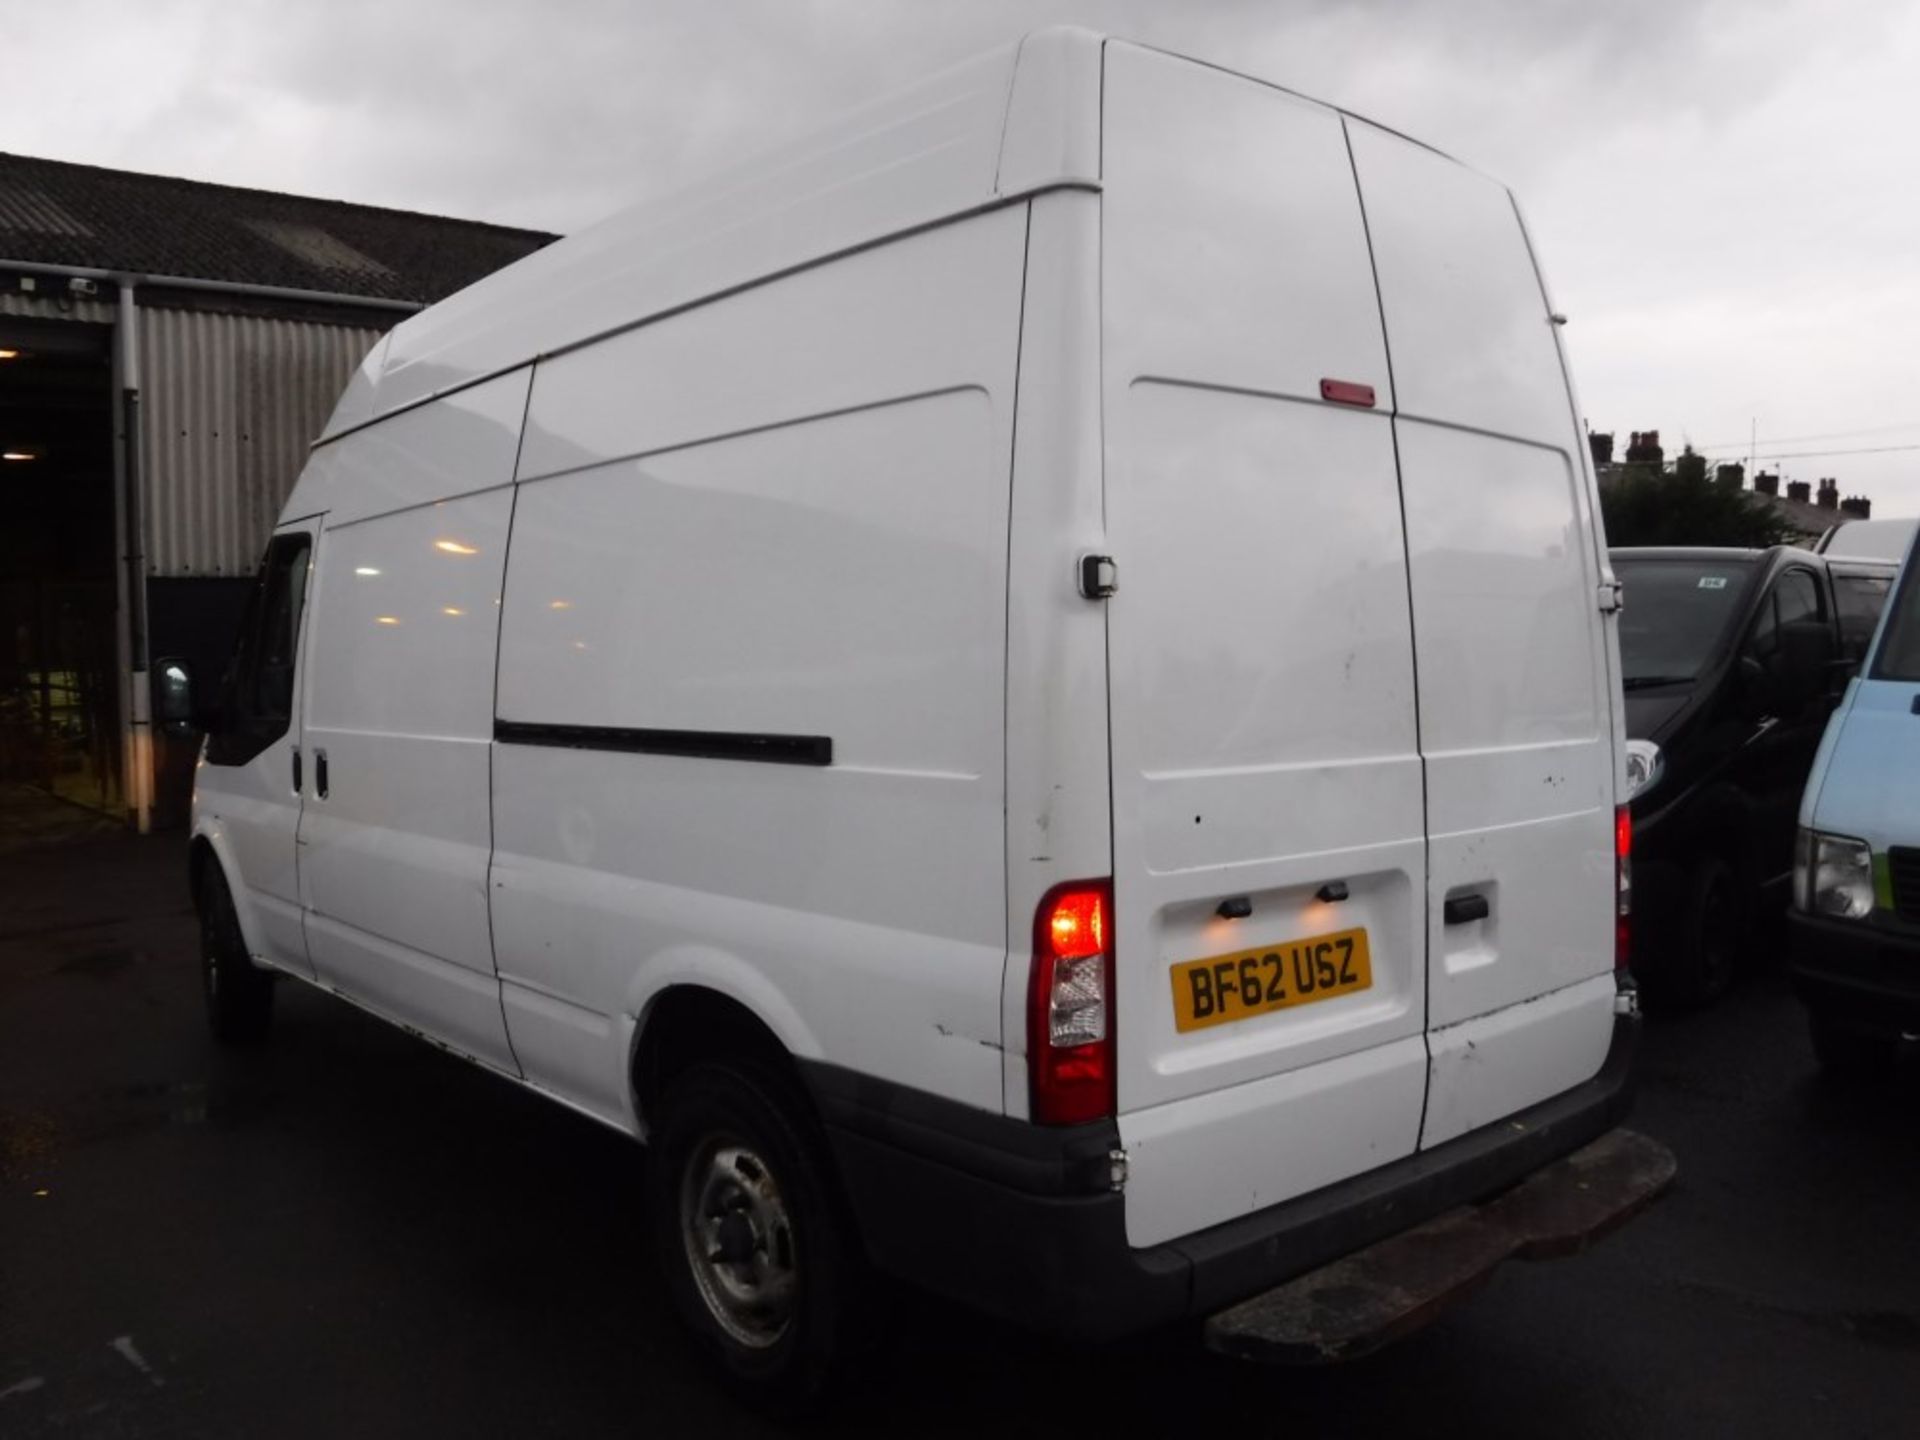 62 reg FORD TRANSIT  T350 RWD, 1ST REG 11/12, 131270M WARRANTED, V5 HERE, 1 OWNER FROM NEW [+ VAT] - Image 3 of 5